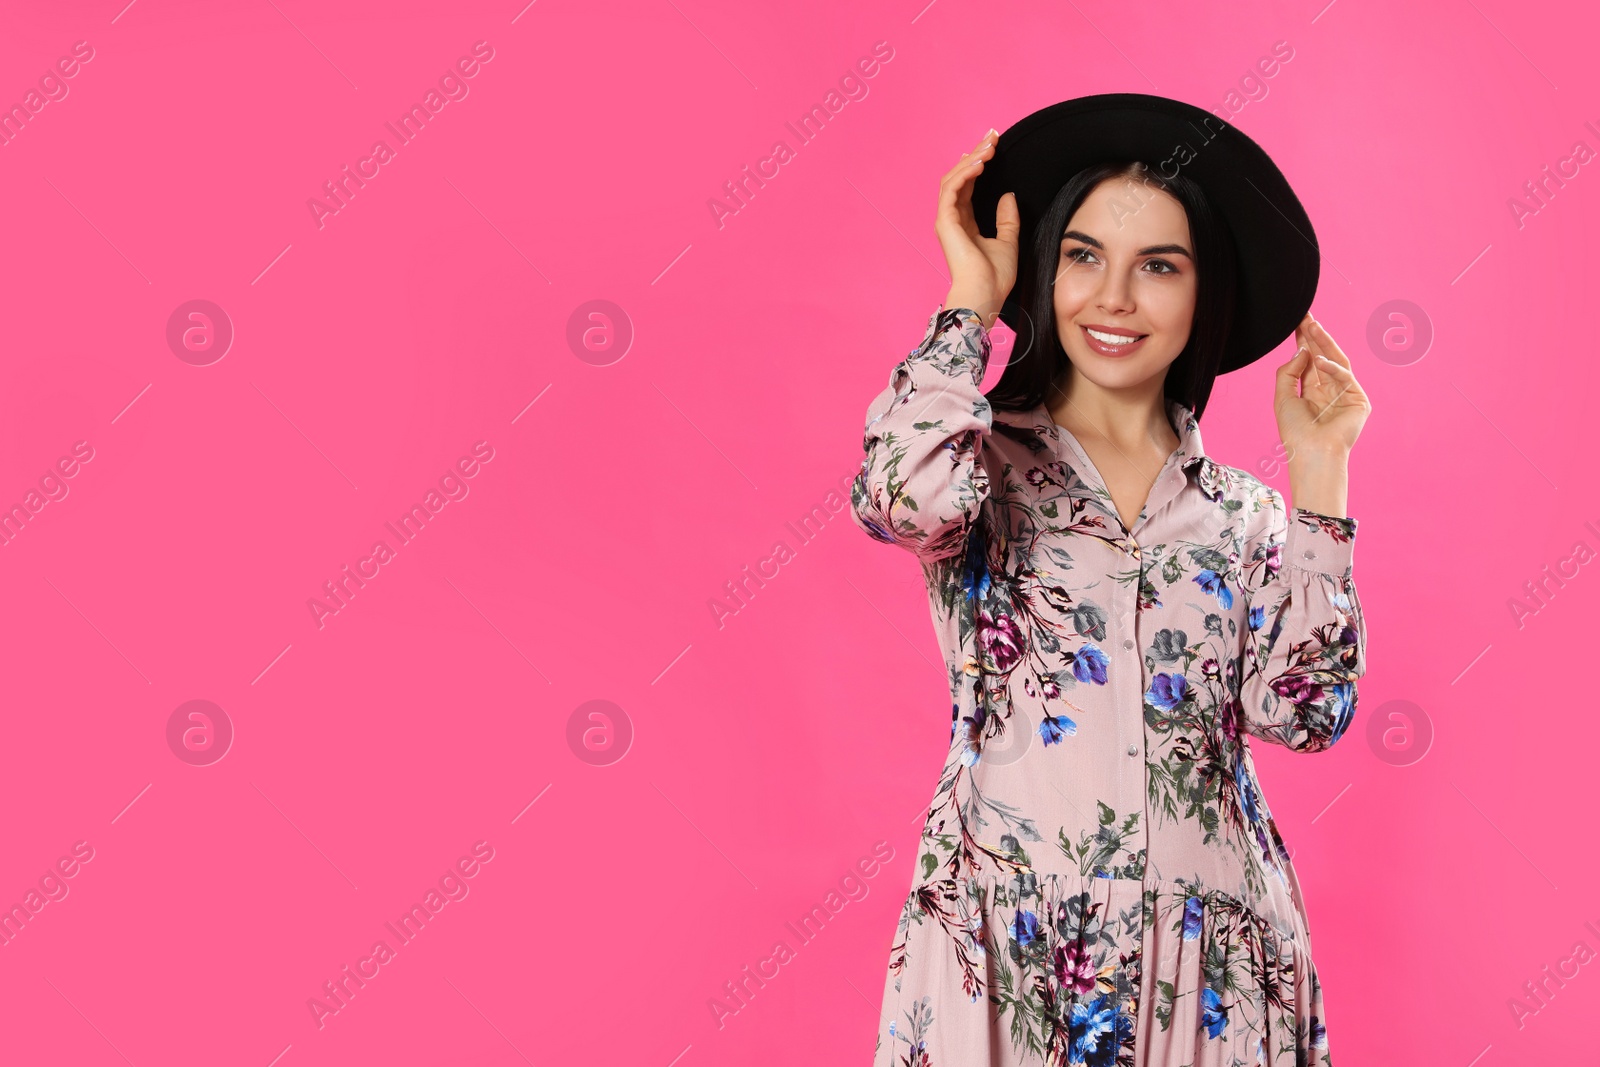 Photo of Young woman wearing floral print dress and stylish hat on pink background. Space for text